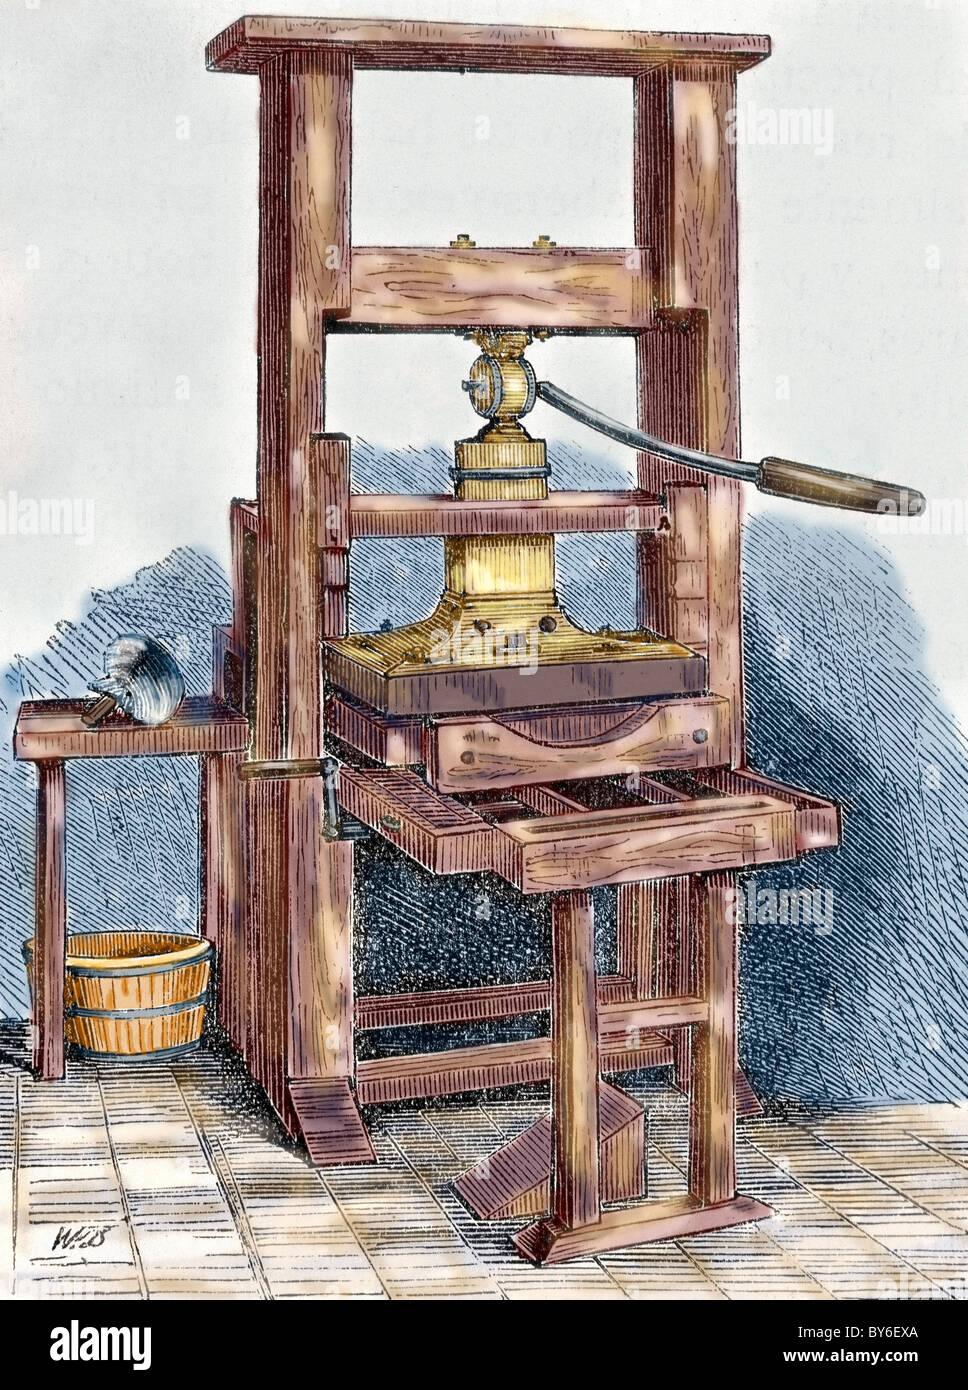 Printing press used by Benjamin Franklin (1706-1790), U.S. statesman and scientist. Colored engraving. Stock Photo